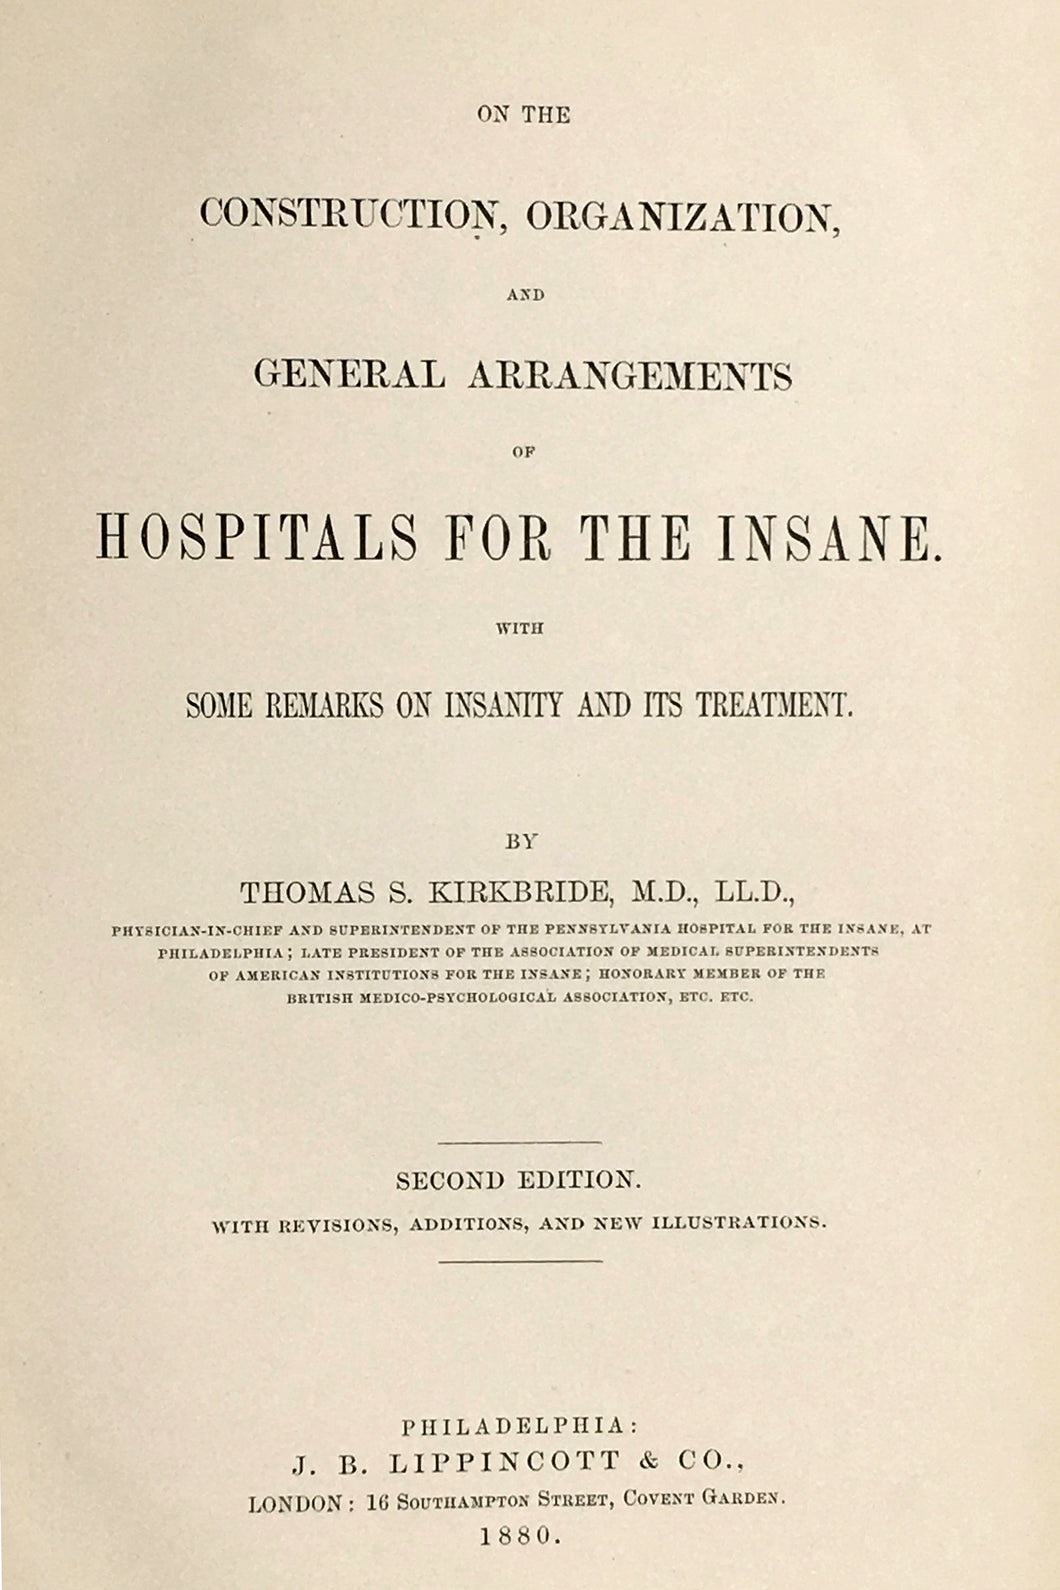 On the construction, organization, and general arrangements of hospitals for the insane : with some remarks on insanity and its treatment